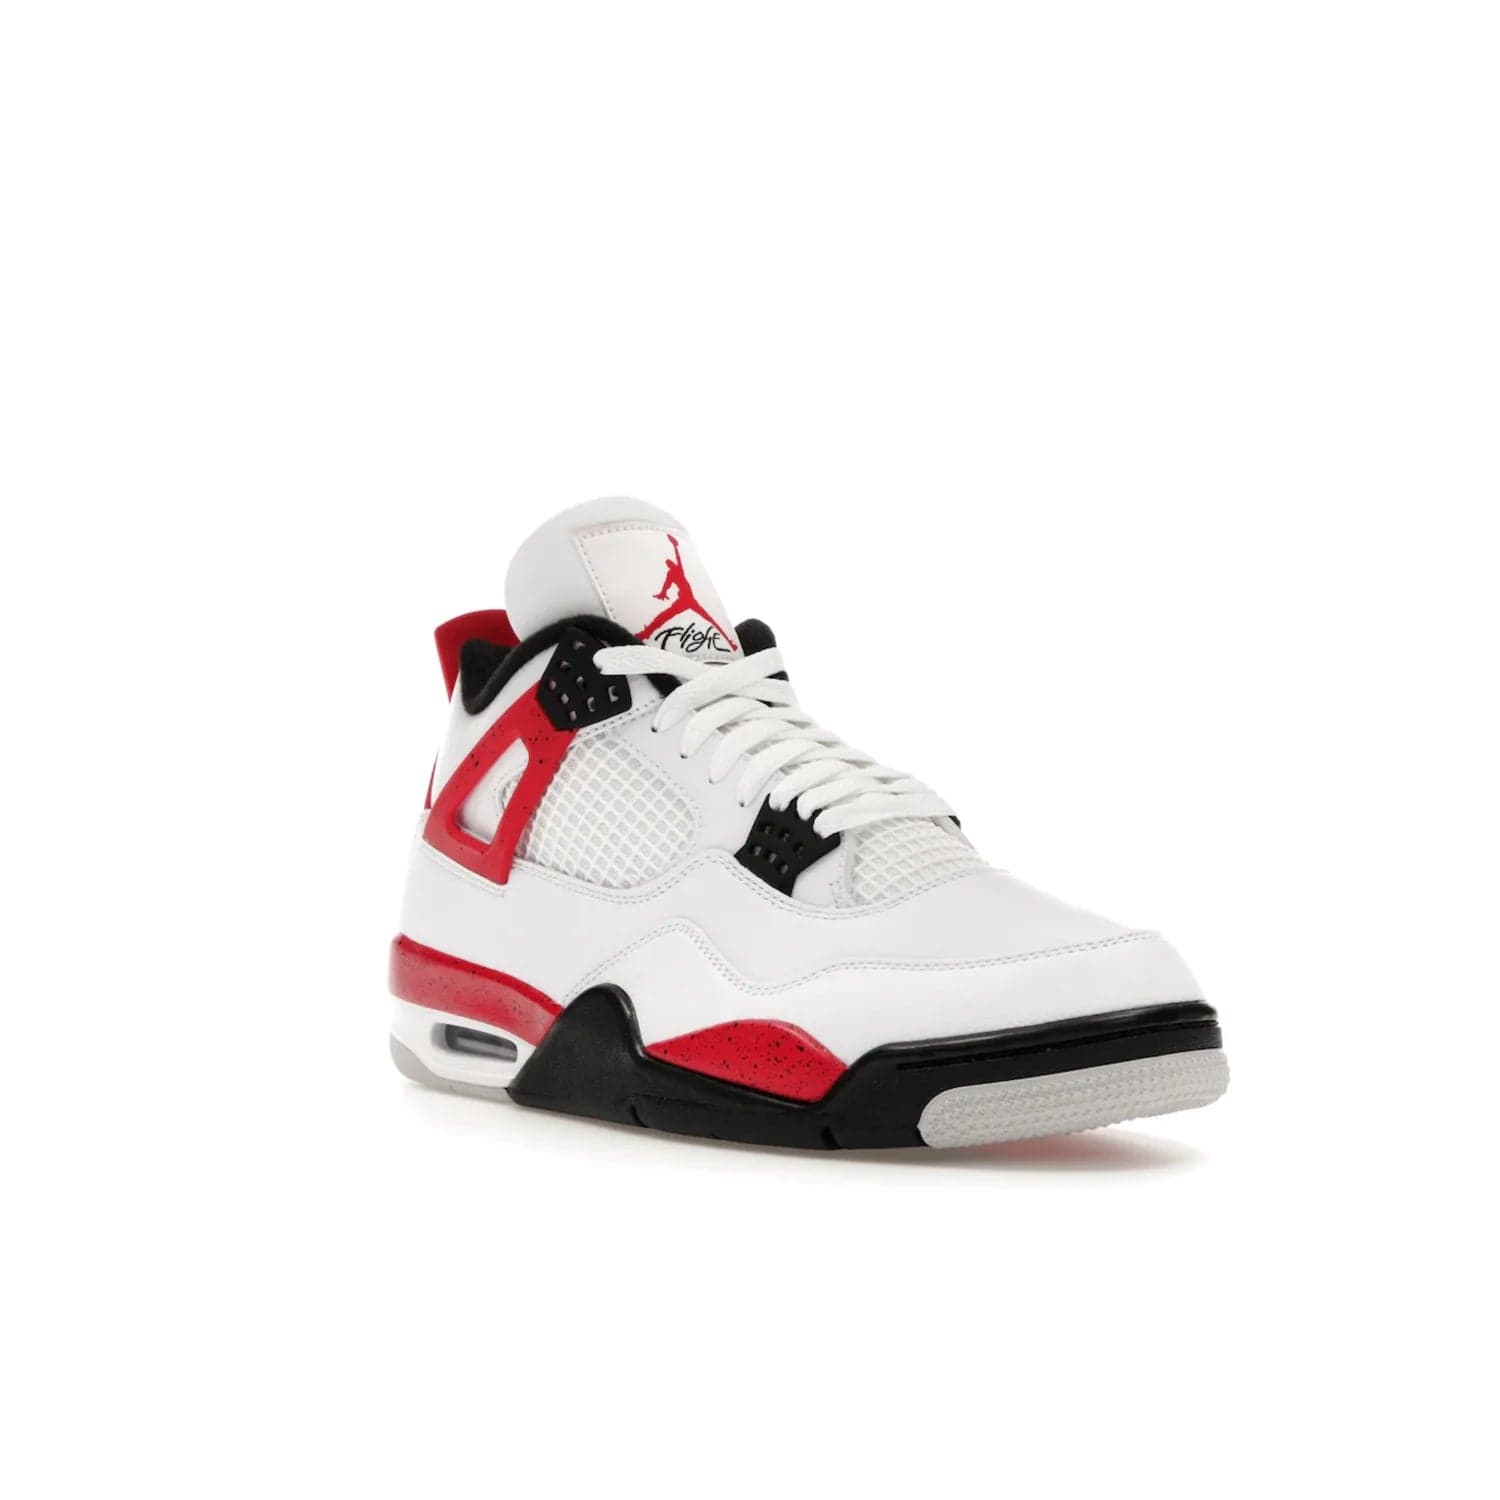 Jordan 4 Retro Red Cement - Image 6 - Only at www.BallersClubKickz.com - Iconic Jordan silhouette with a unique twist. White premium leather uppers with fire red and black detailing. Black, white, and fire red midsole with mesh detailing and Jumpman logo. Jordan 4 Retro Red Cement released with premium price.